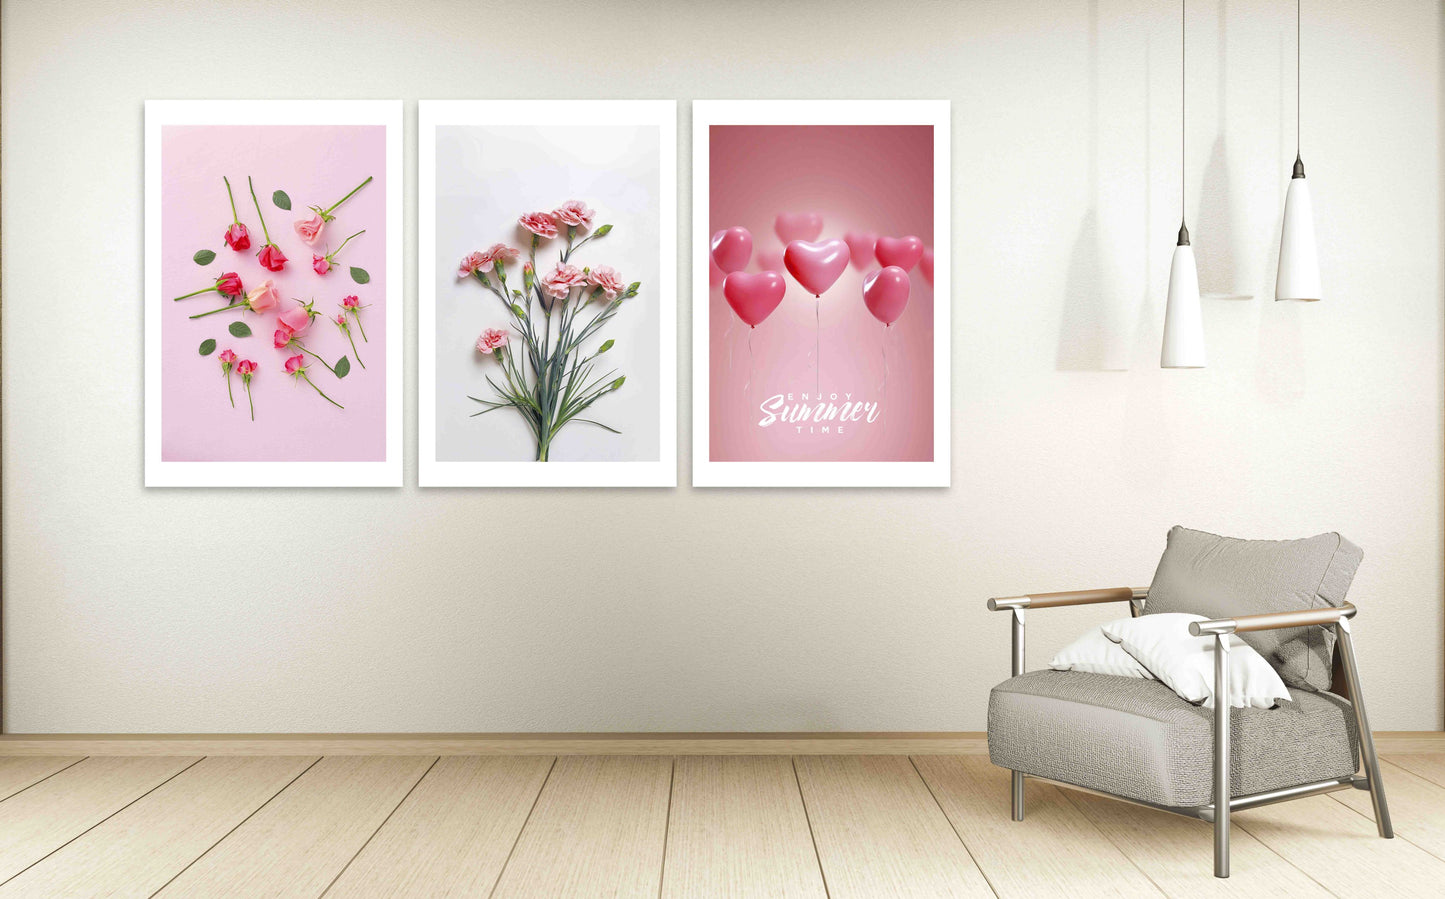 Flowers wall art paintings on canvas, home wall decor, printable wall art set of 3, valentines day gift, heart decor wall, printable art